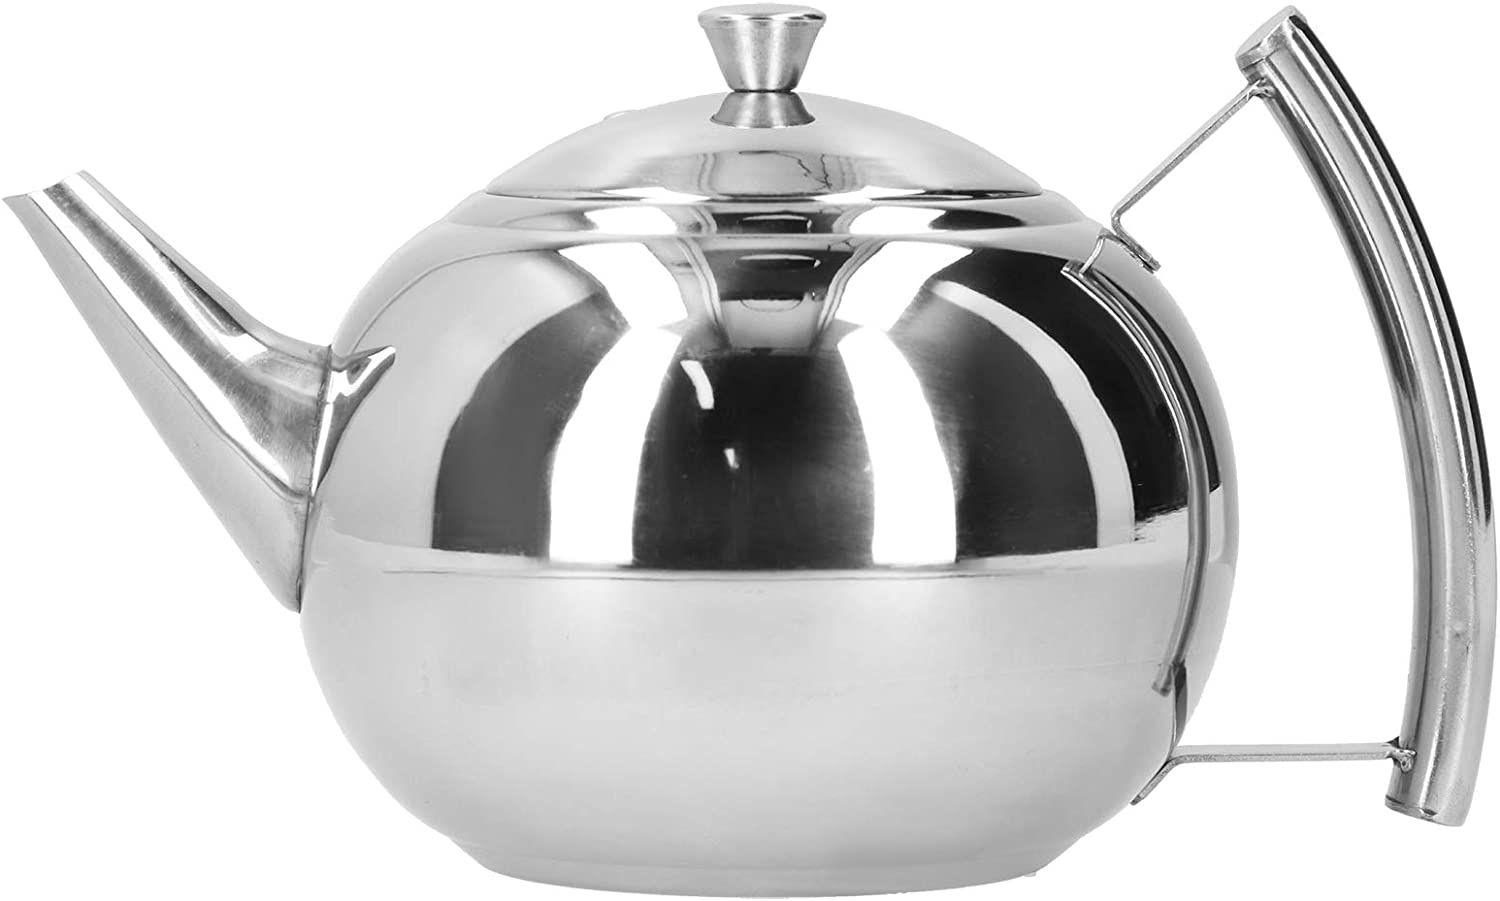 Nikou Tea kettle, stainless steel coffee pot, 1.5 litres, water container, 2 litres, teapot with tea leaf filter (1.5 litres)